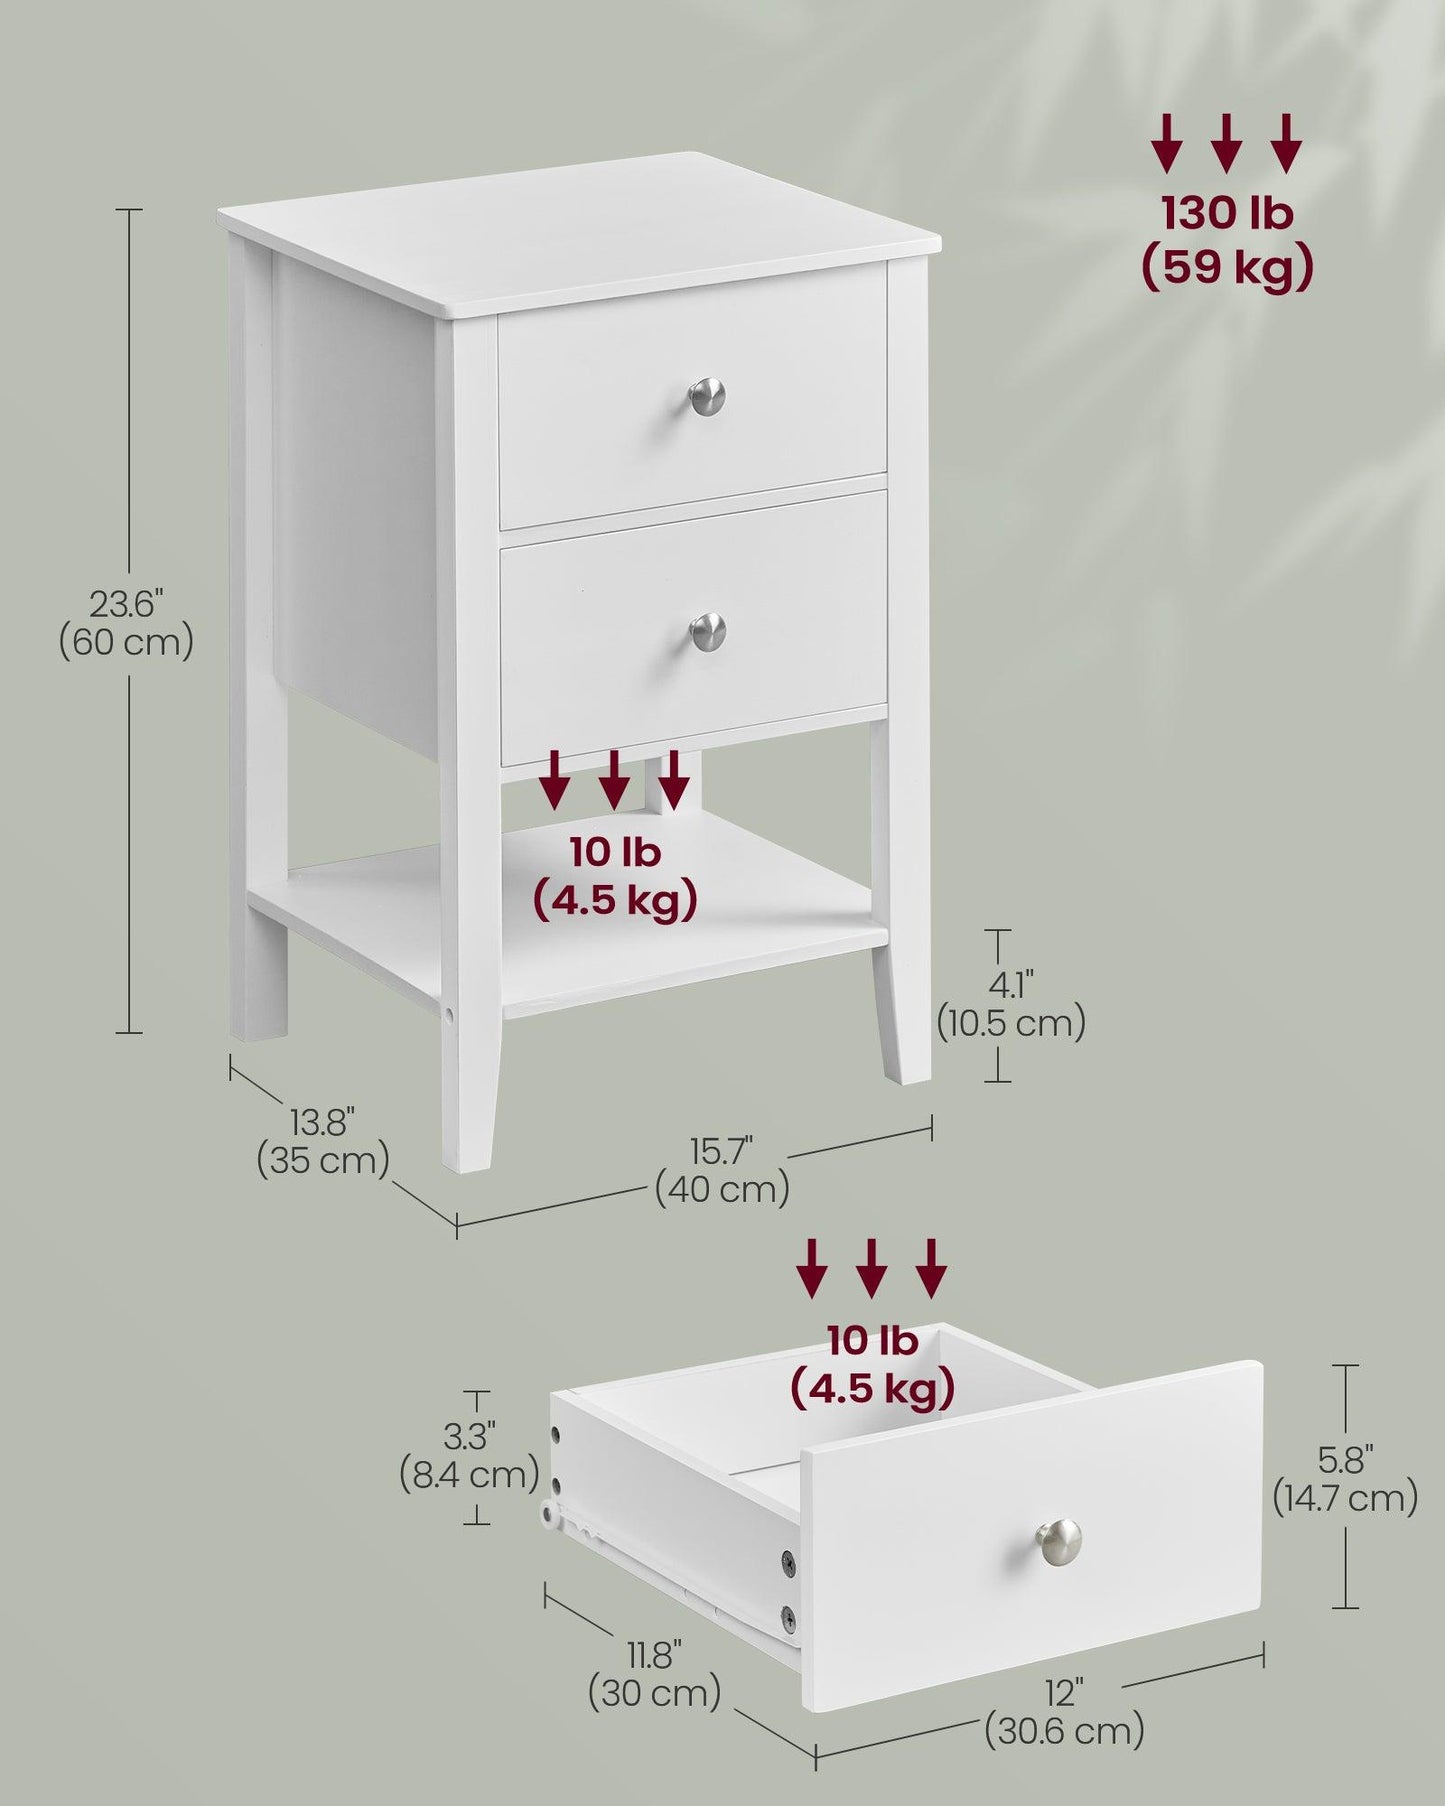 Set of 2 Bamboo Nightstands Cloud White